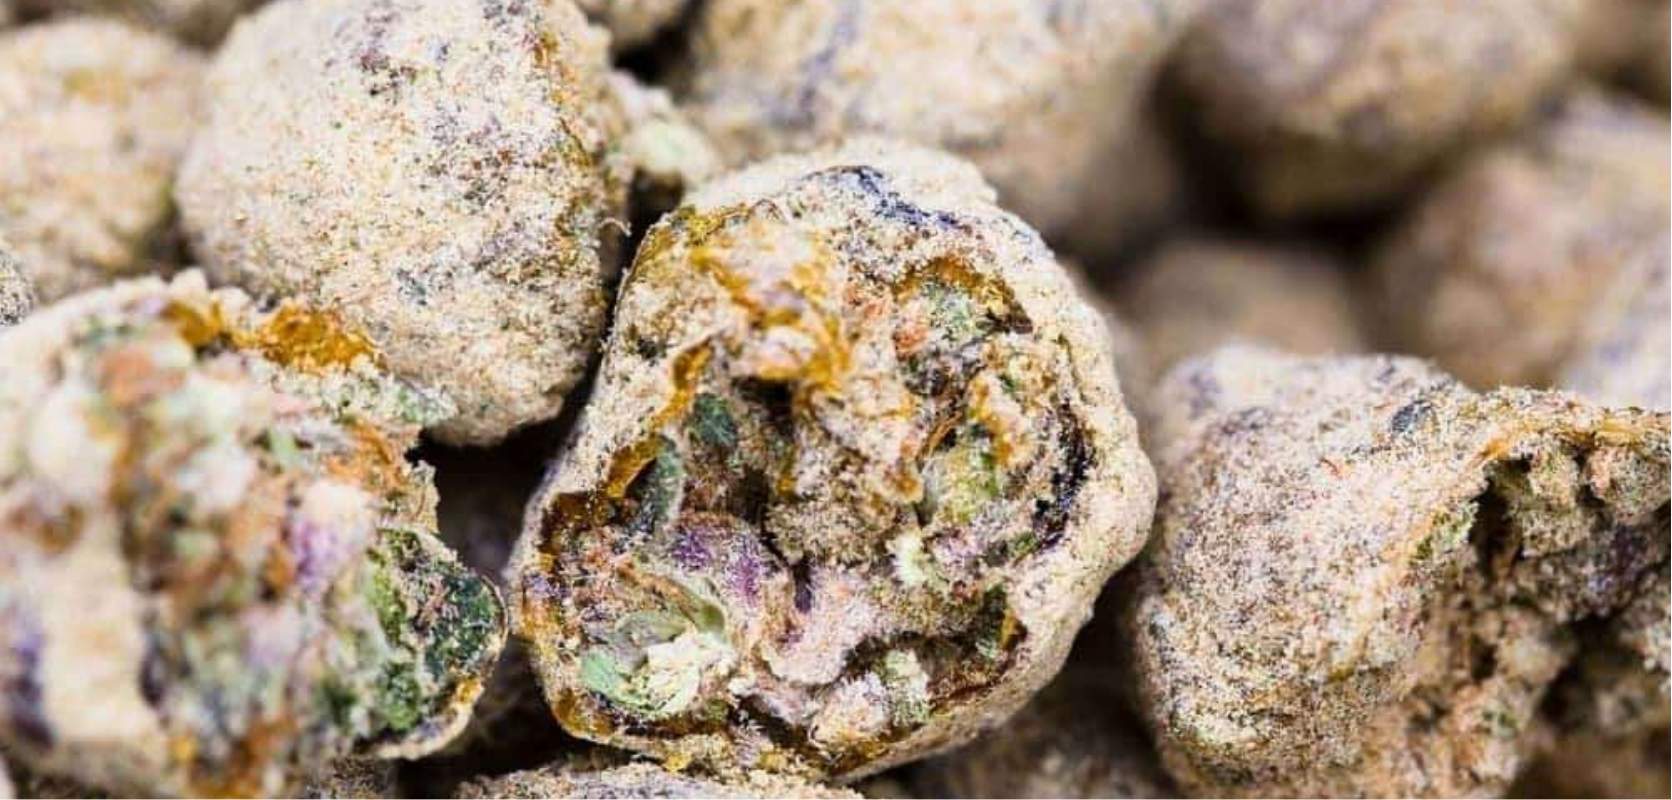 Once you know how it is made, it is easy to understand why moon rocks THC content is so high. 